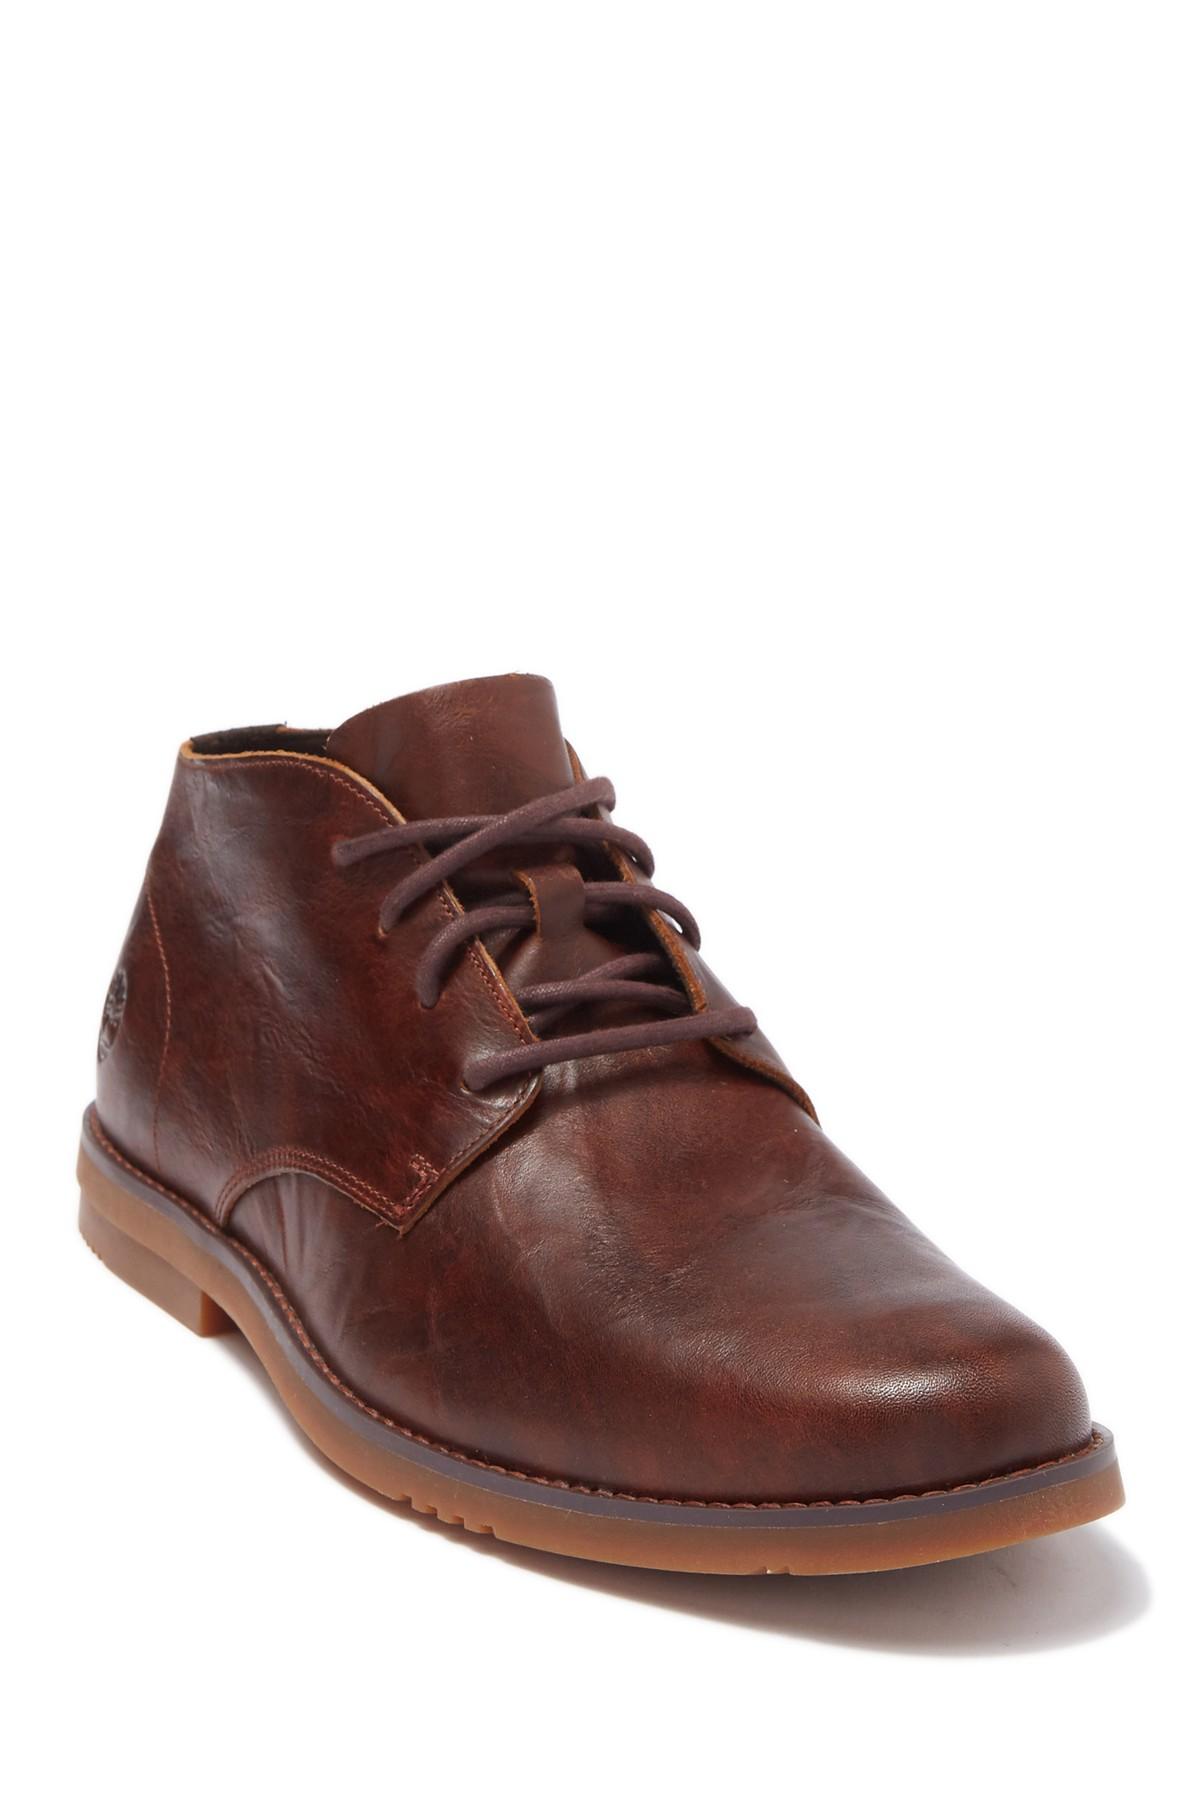 Timberland Leather Yorkdale Chukka in Brown for Men - Lyst